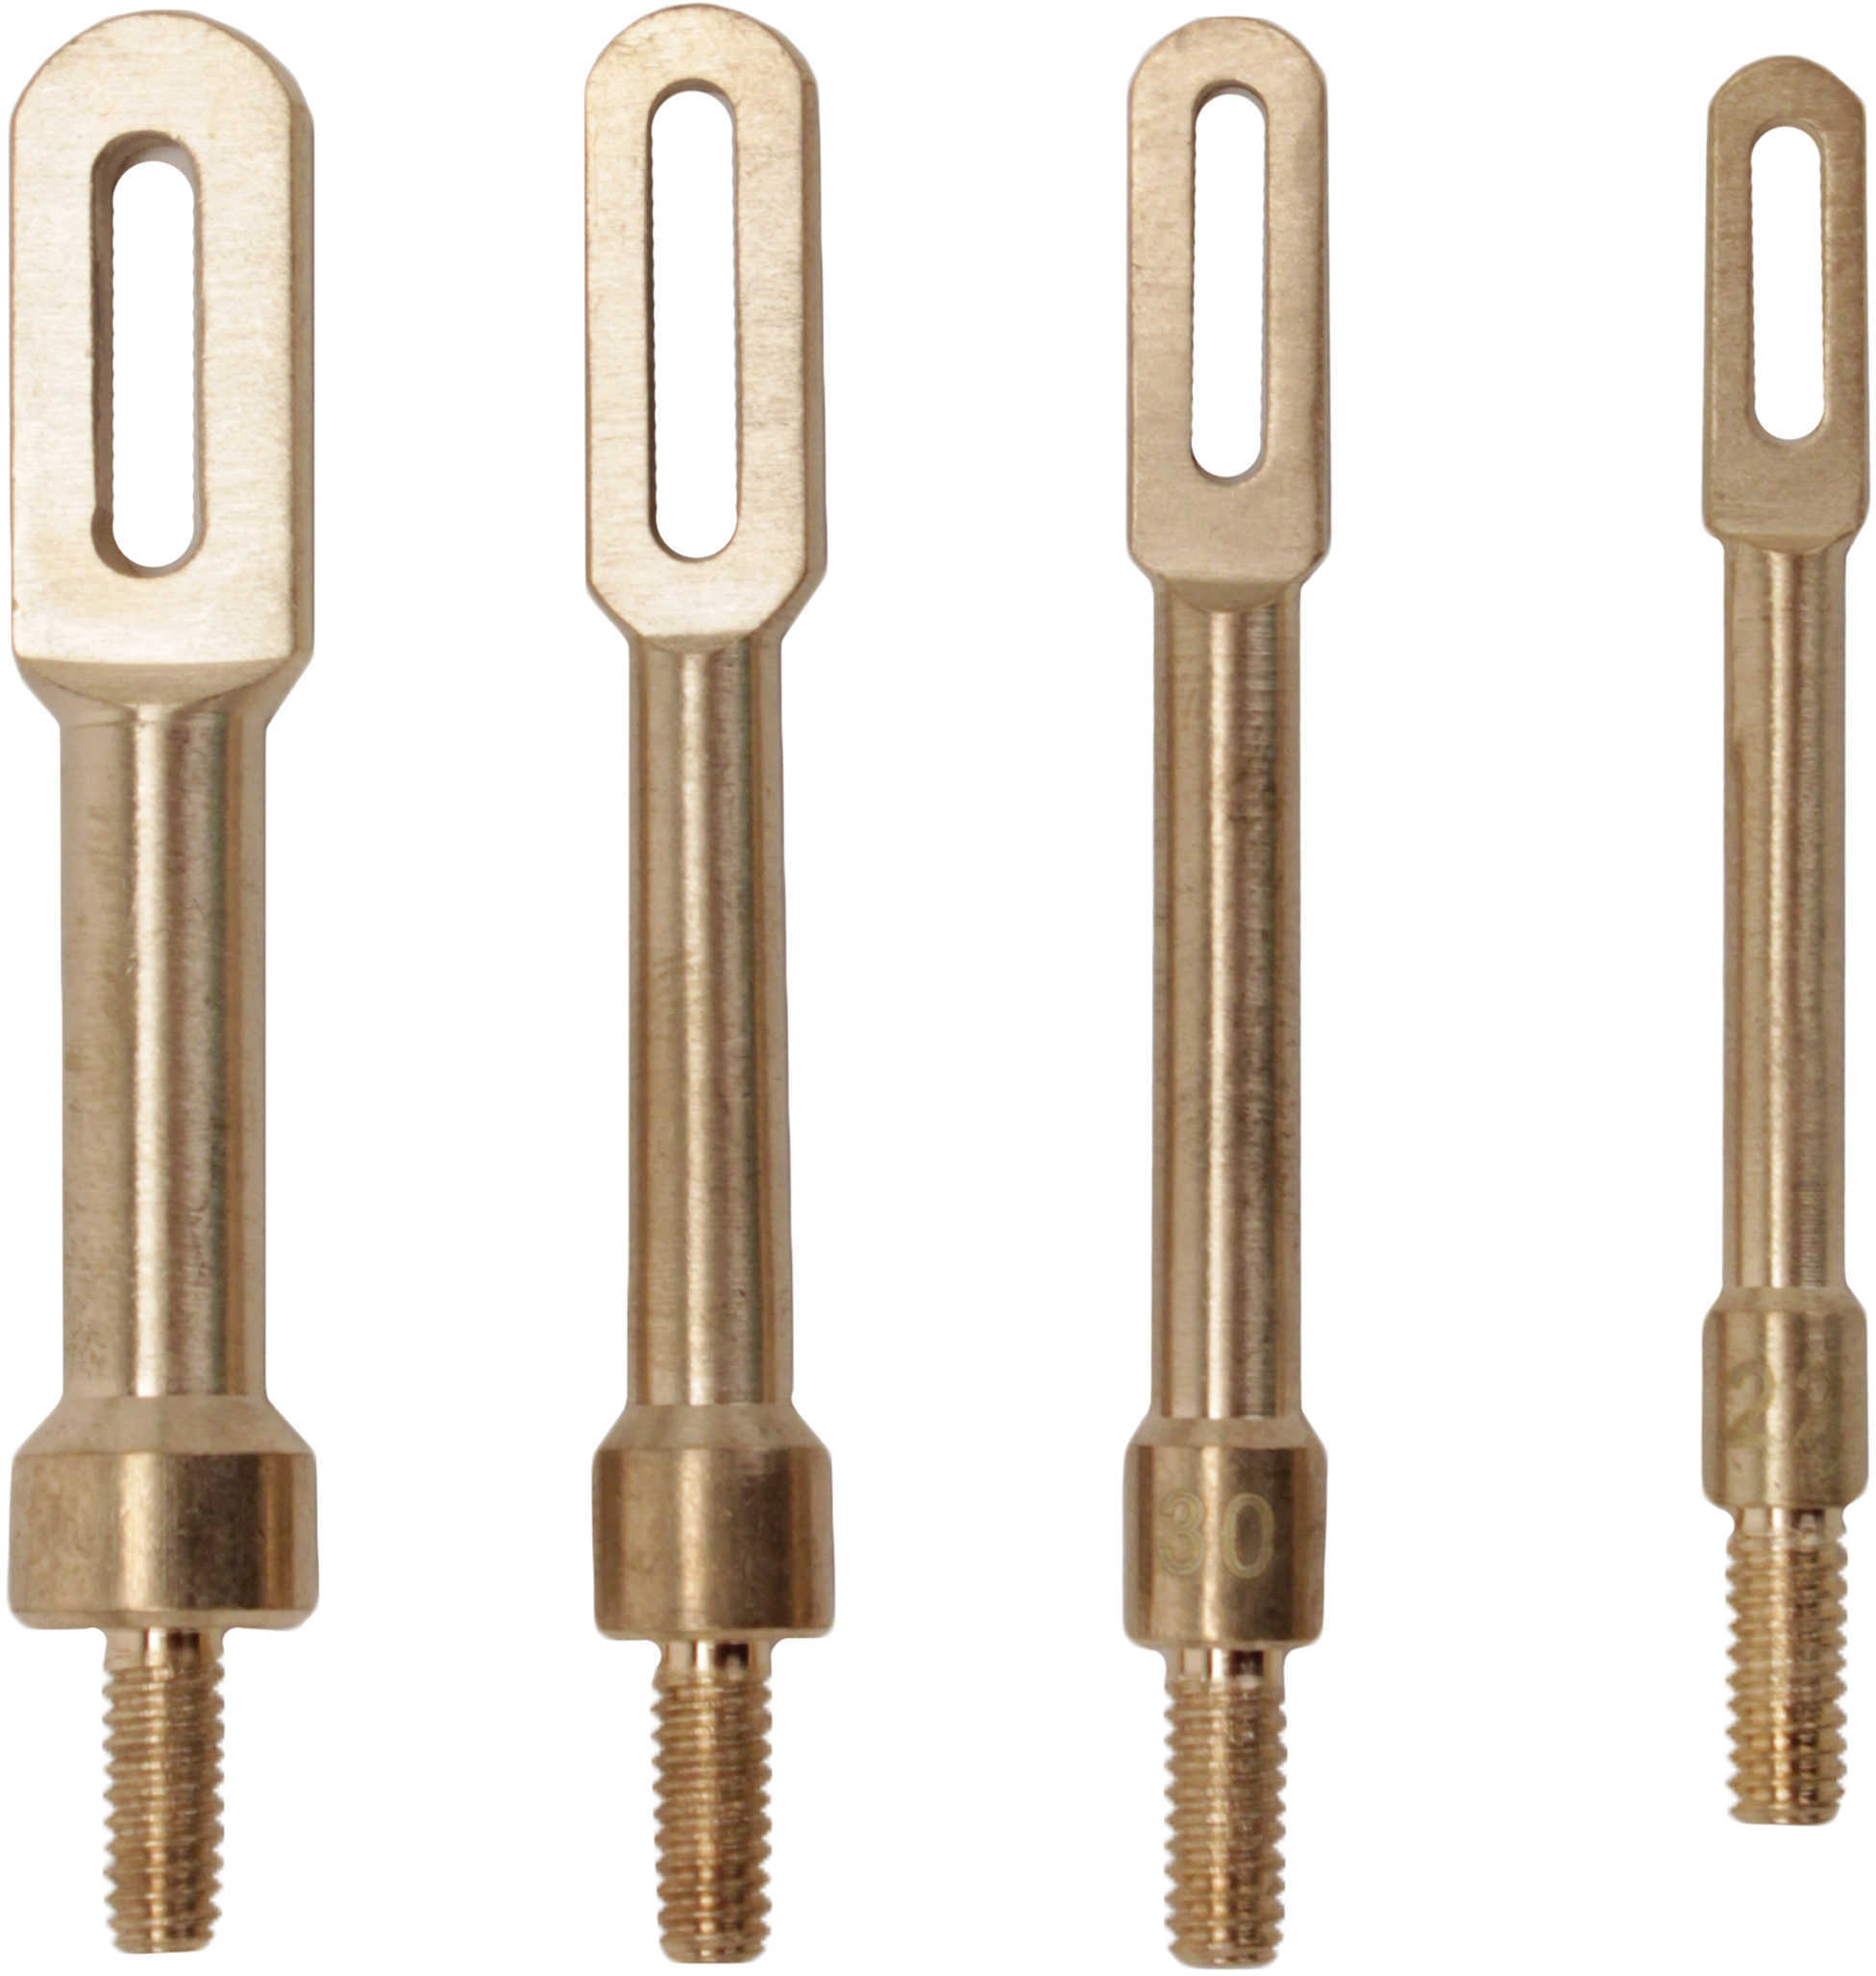 Tipton 554428 Solid Brass Slotted Tips Rifle/Pistol 8-32 4/Set